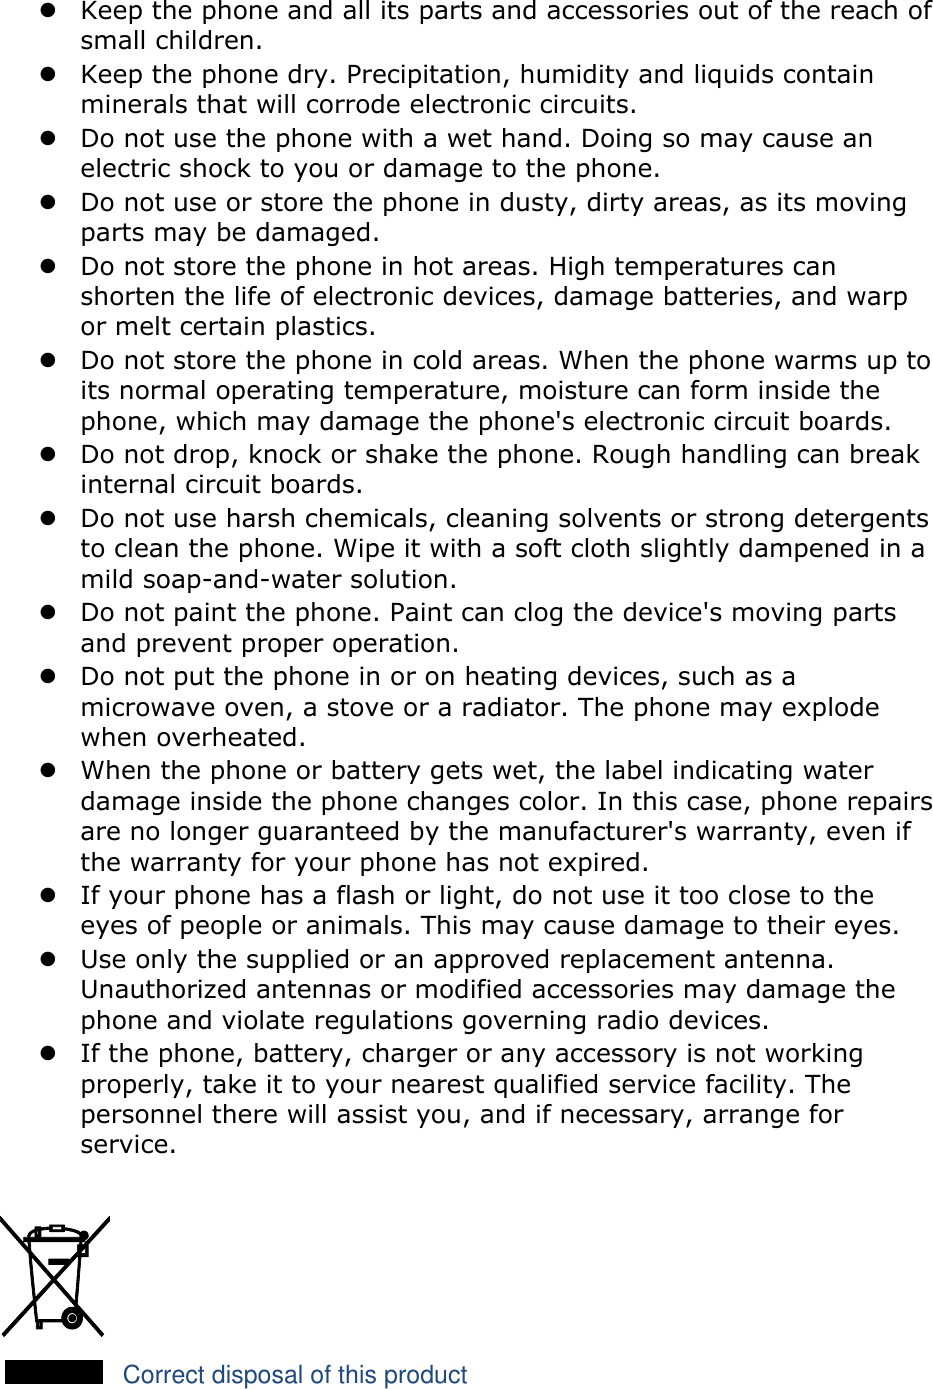 Page 26 of Samsung Electronics Co GTS8600 Cellular/PCS GSM Phone with WLAN and Bluetooth User Manual